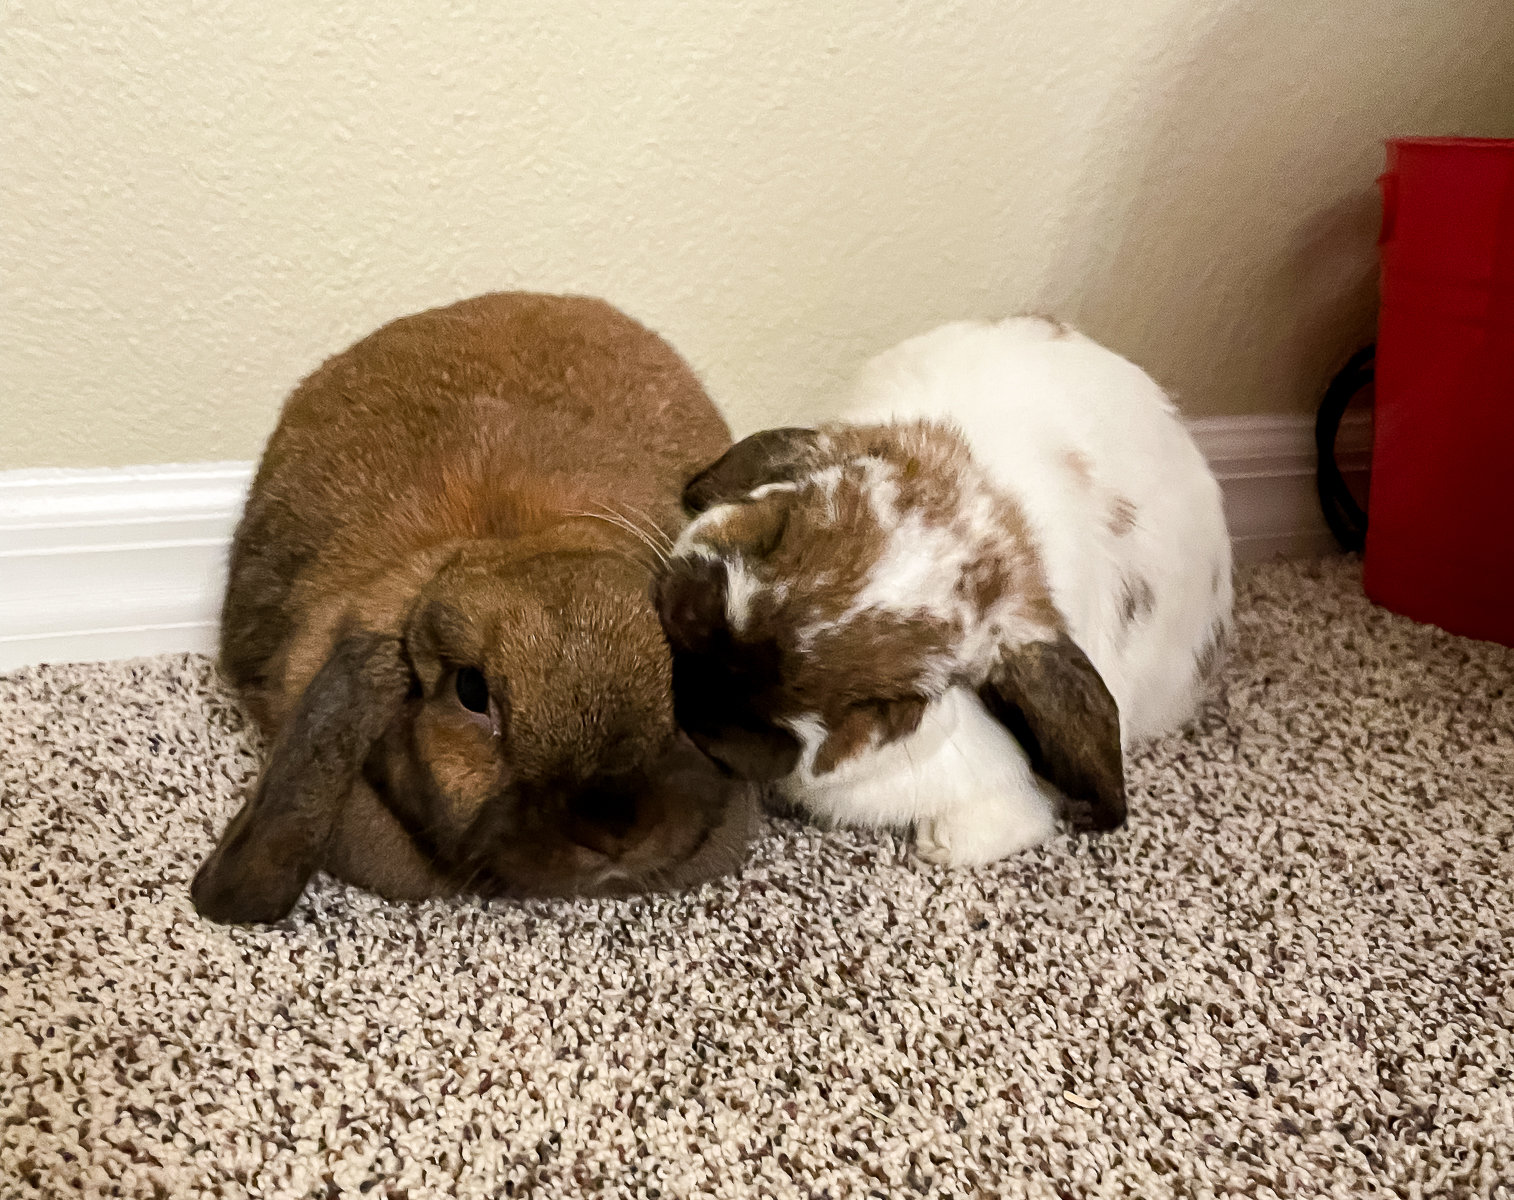 Double The Cuteness By Adding A 2Nd Pet Bunny To Your Family